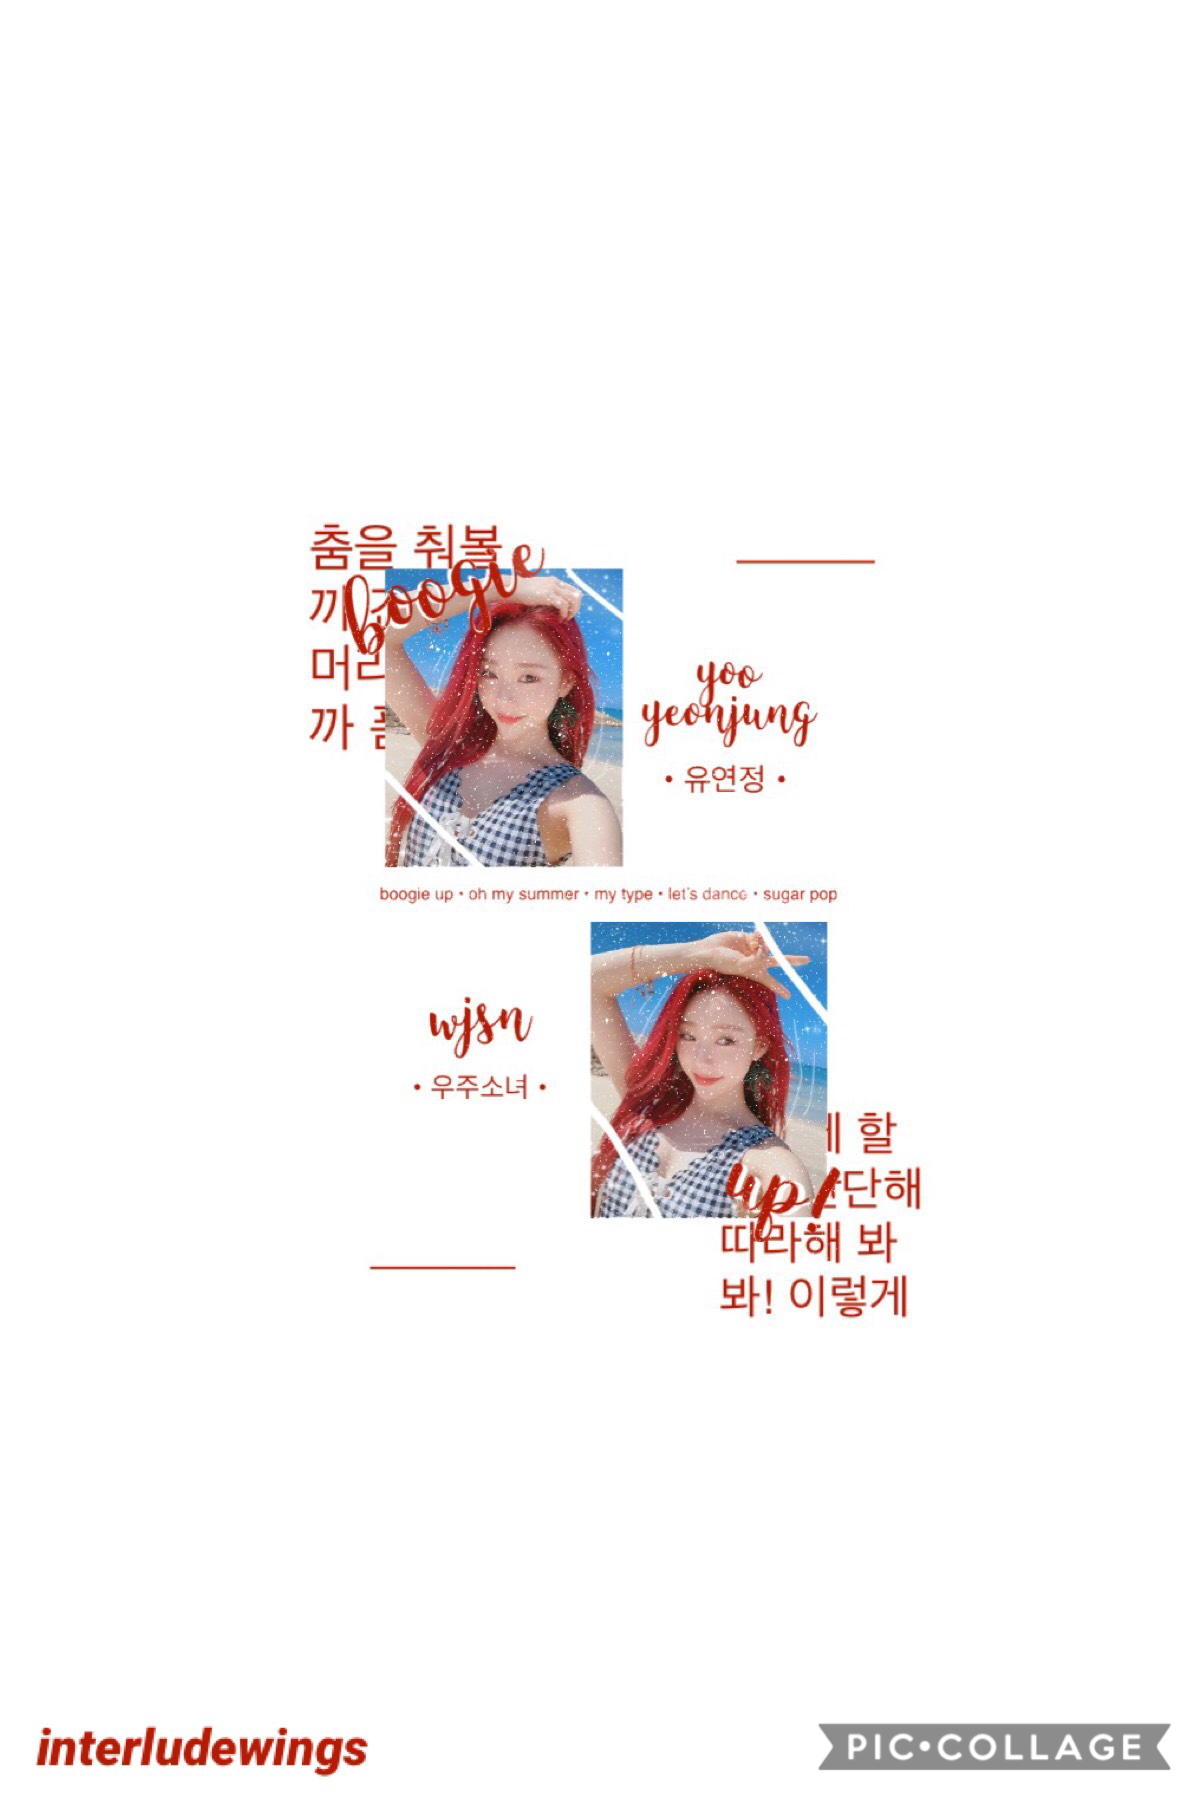 🏝 open 🏝
yeonjung~wjsn 
this is a little ugly but sometimes it be like that!! wjsn has been getting well deserved wins this era 😌 also i realized i’m terrible at replying to comments so i’ll work on that!